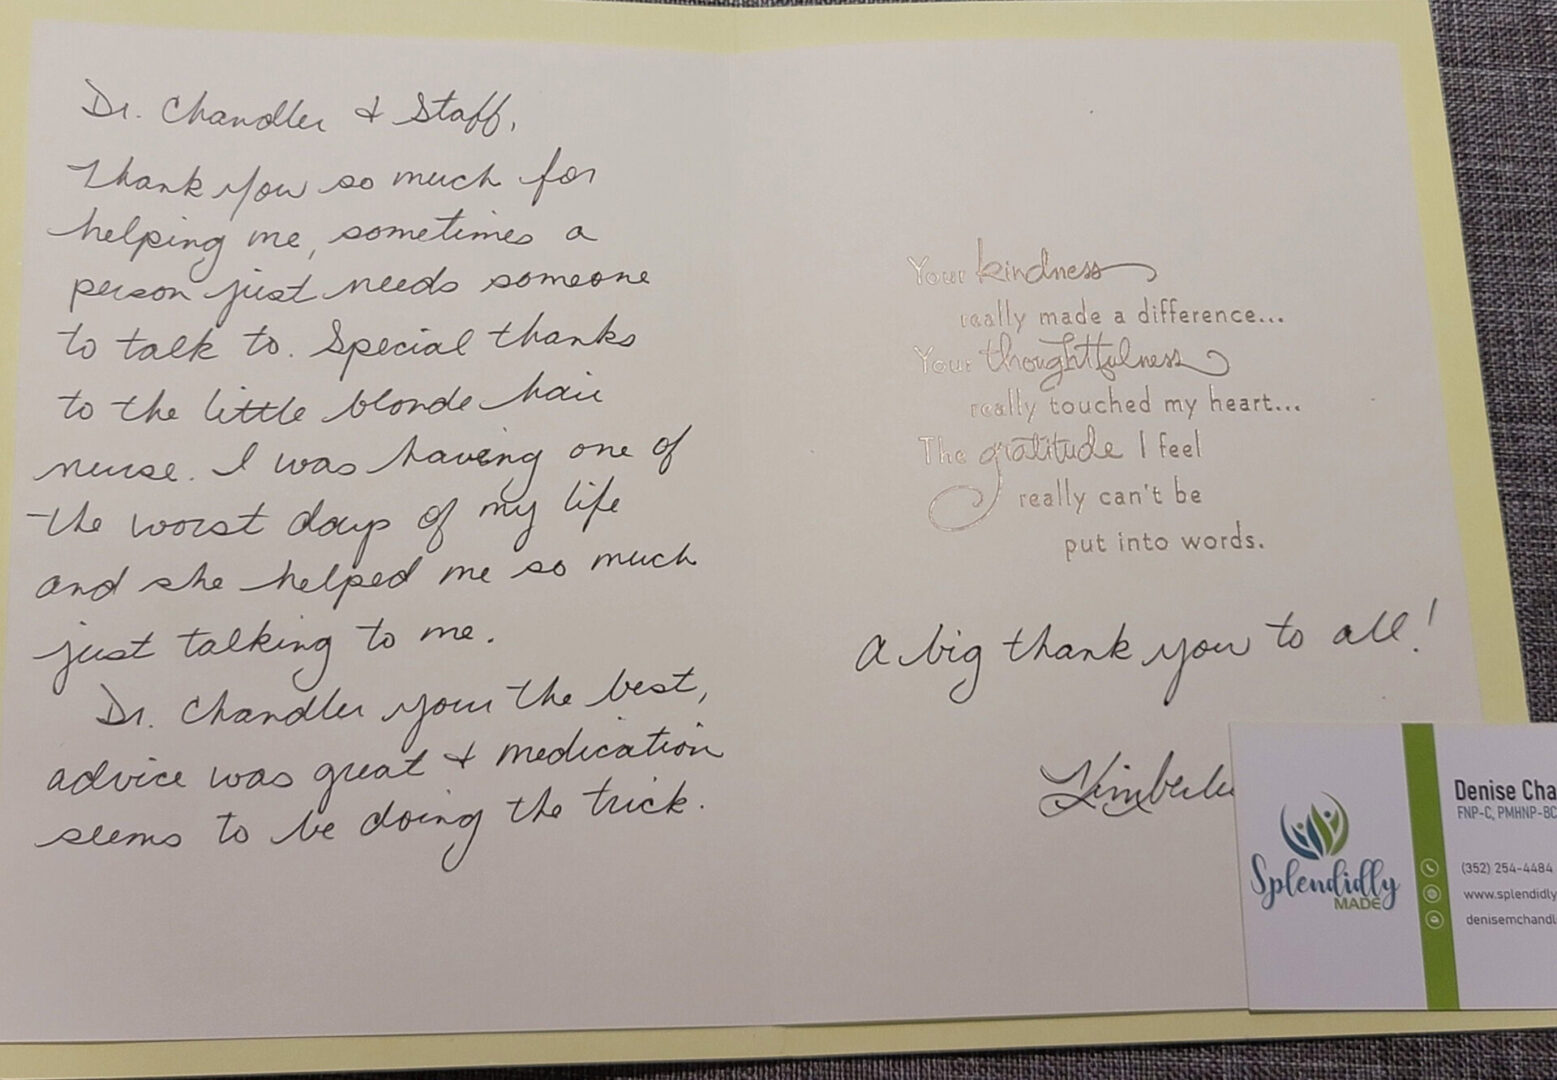 A card with handwritten notes and a picture of the back.